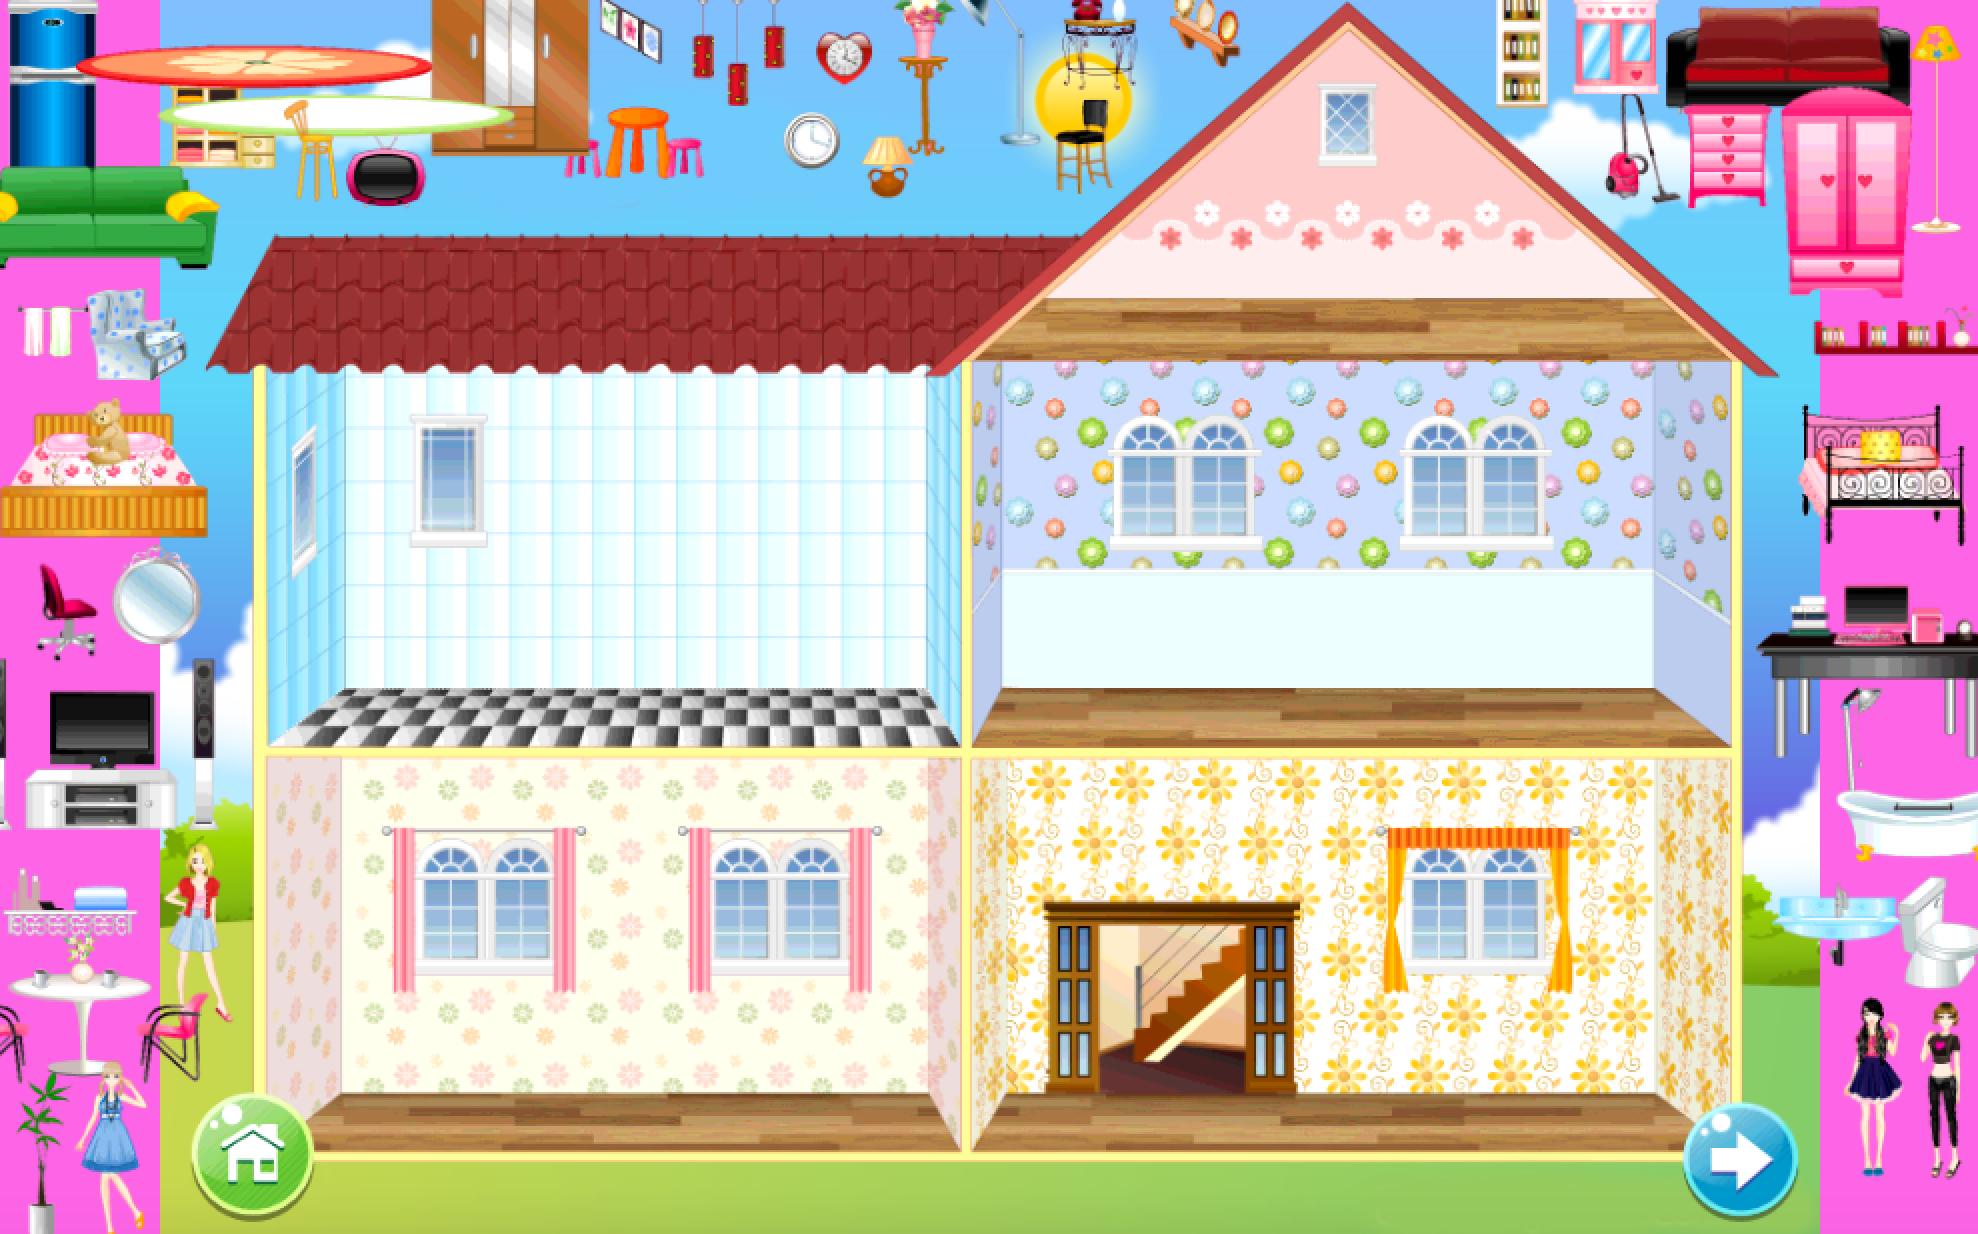 Home Decoration Games APK for Android Download